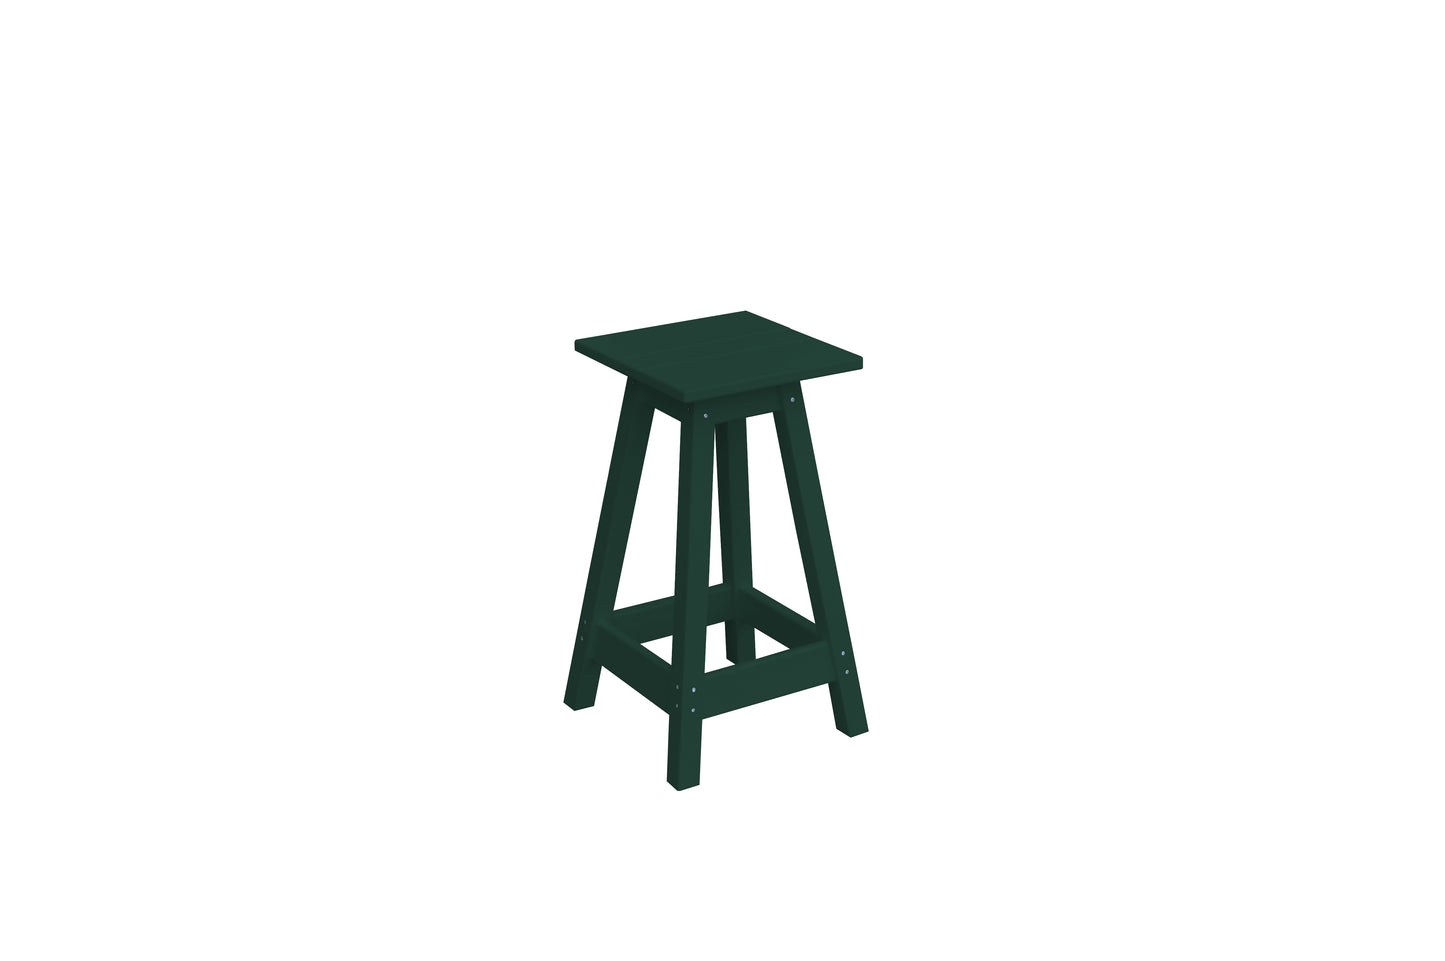 A&L Furniture Co. Recycled Plastic Square Stool (Counter Height) - LEAD TIME TO SHIP 10 BUSINESS DAYS